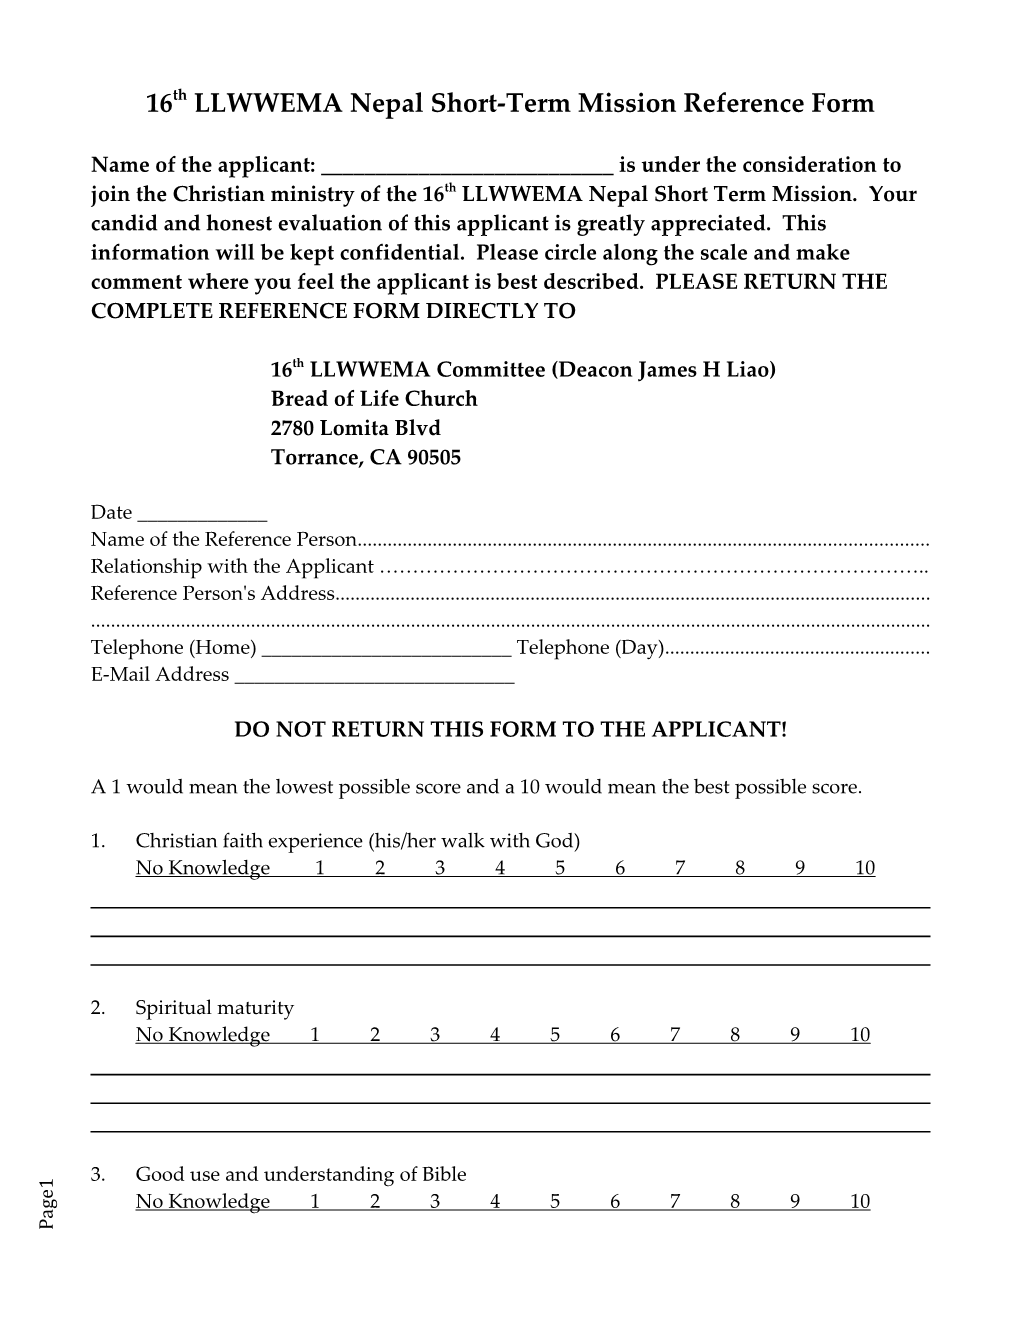 Bread of Life Church Short-Term Mission Reference Form